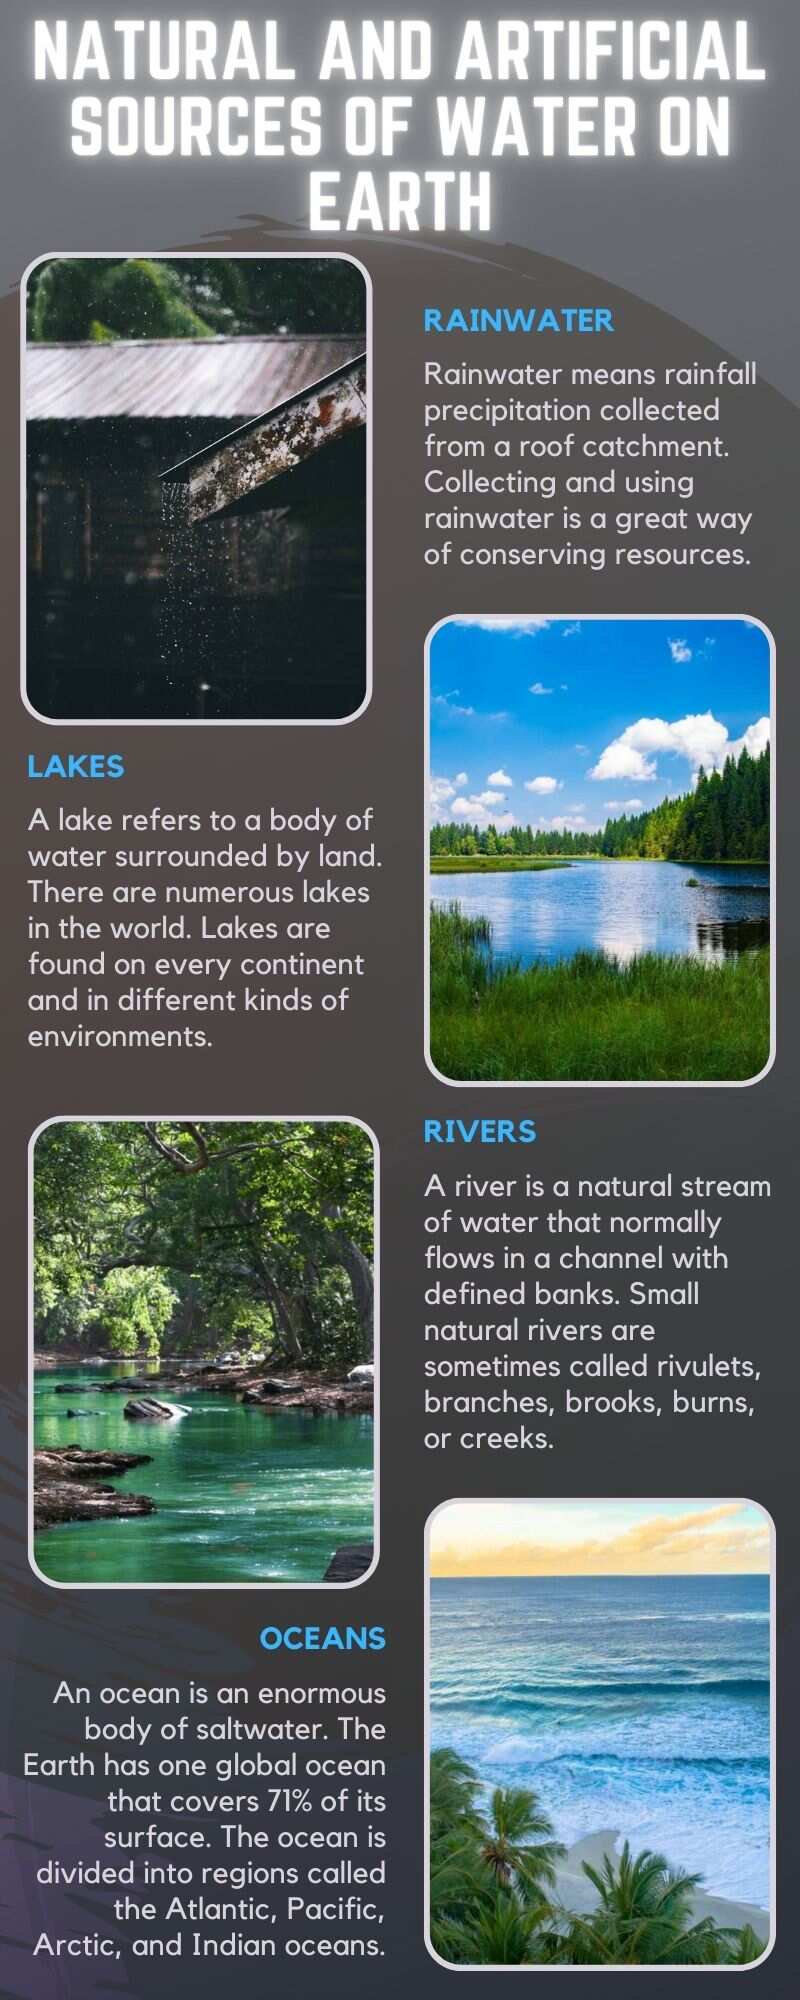 List of natural and artificial sources of water on Earth